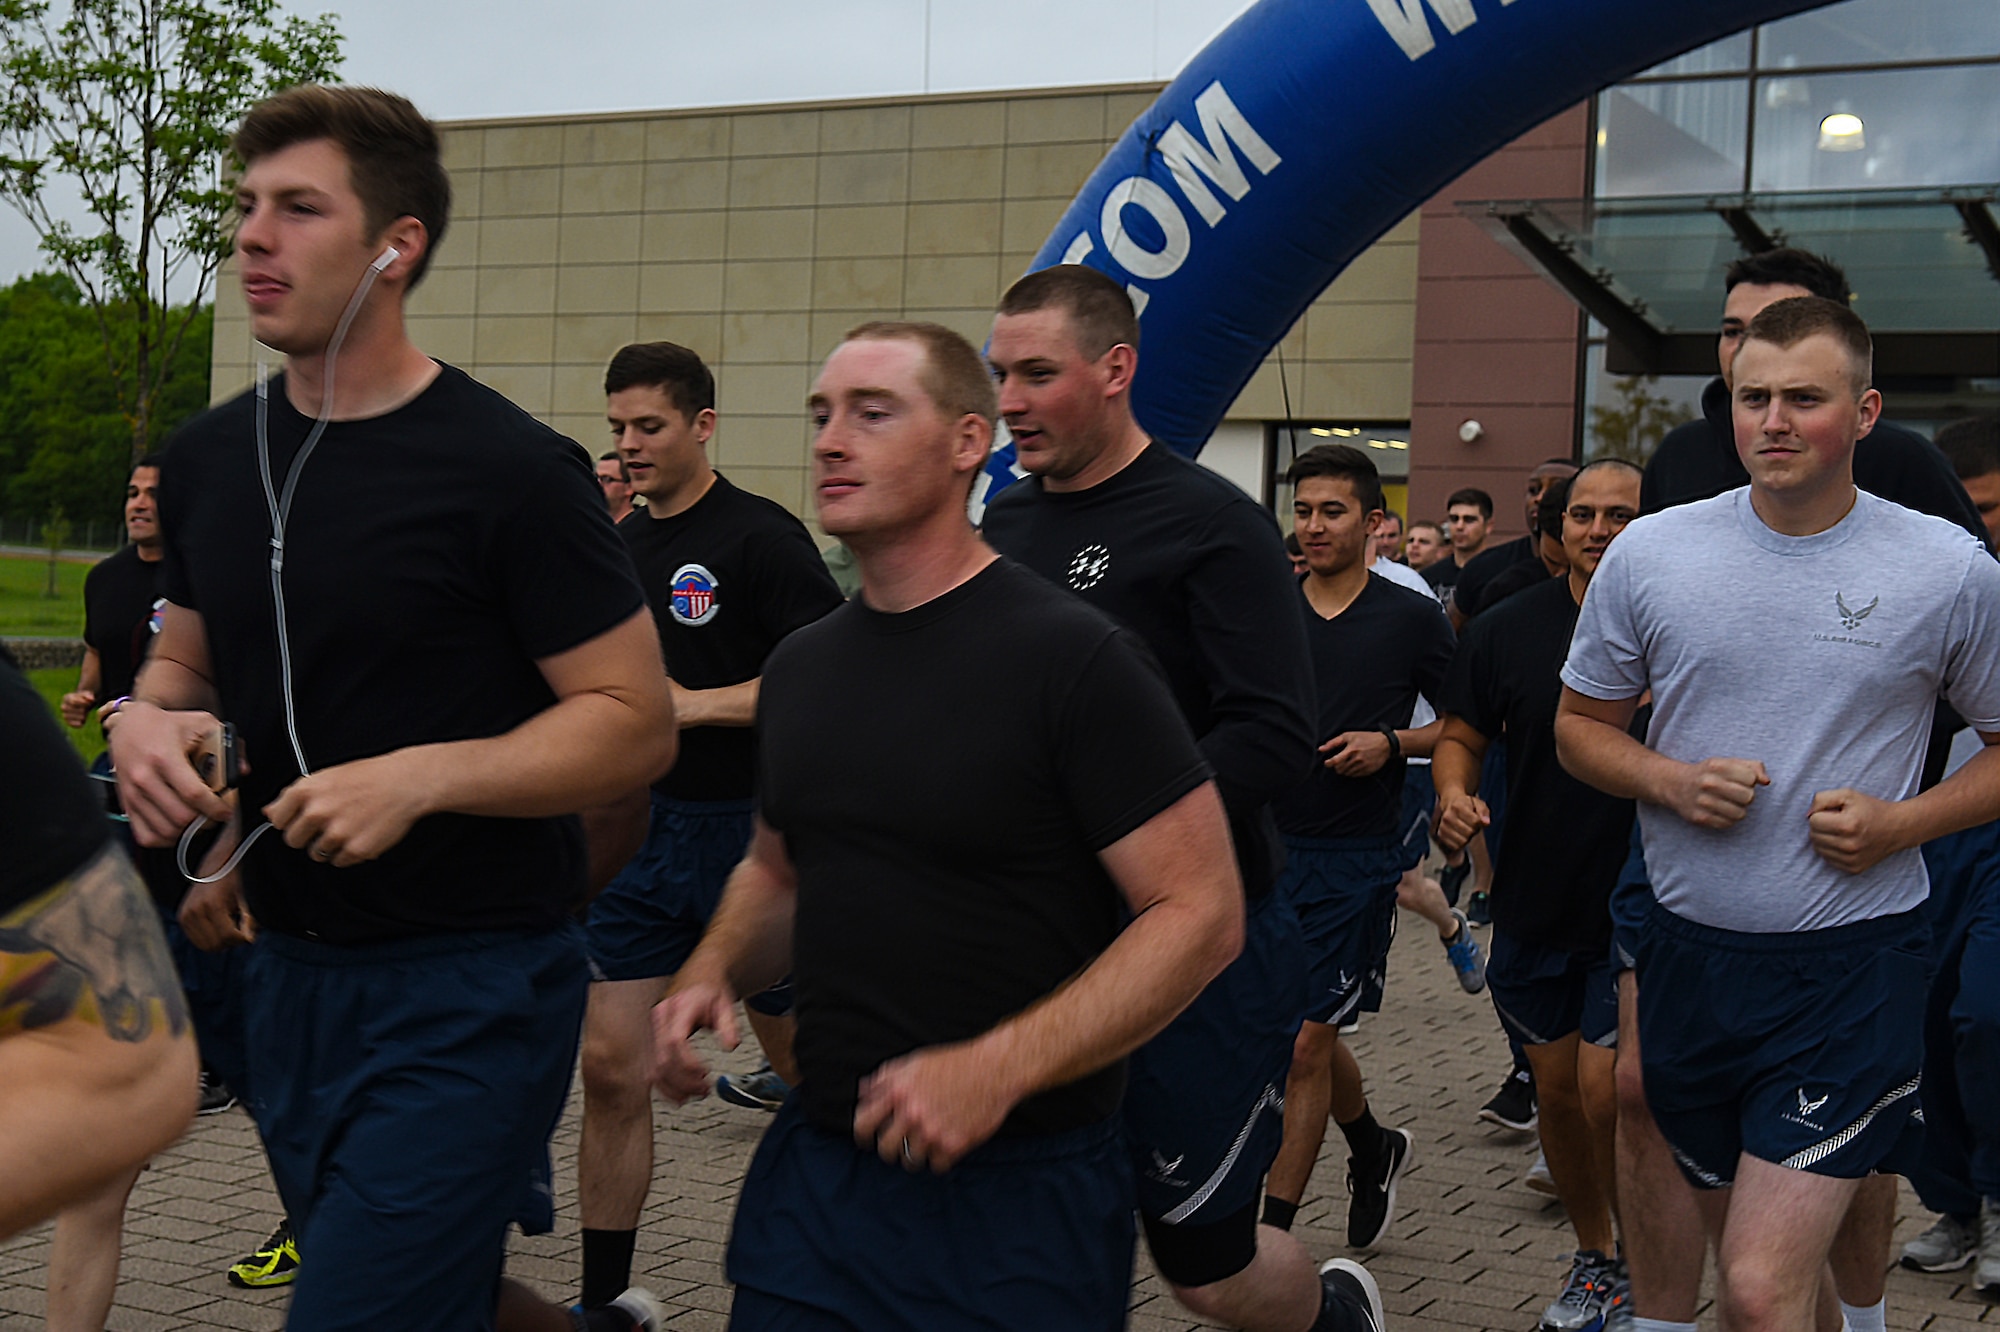 U.S. Airmen assigned to Spangdahlem Air Base, Germany begin a National Police Week memorial 5K run here May 19, 2017. NPW was established in 1962 by President John F. Kennedy, to honor the bravery and sacrifices of the men and women who serve as police officers. (U.S. Air Force photo by Senior Airman Dawn M. Weber)